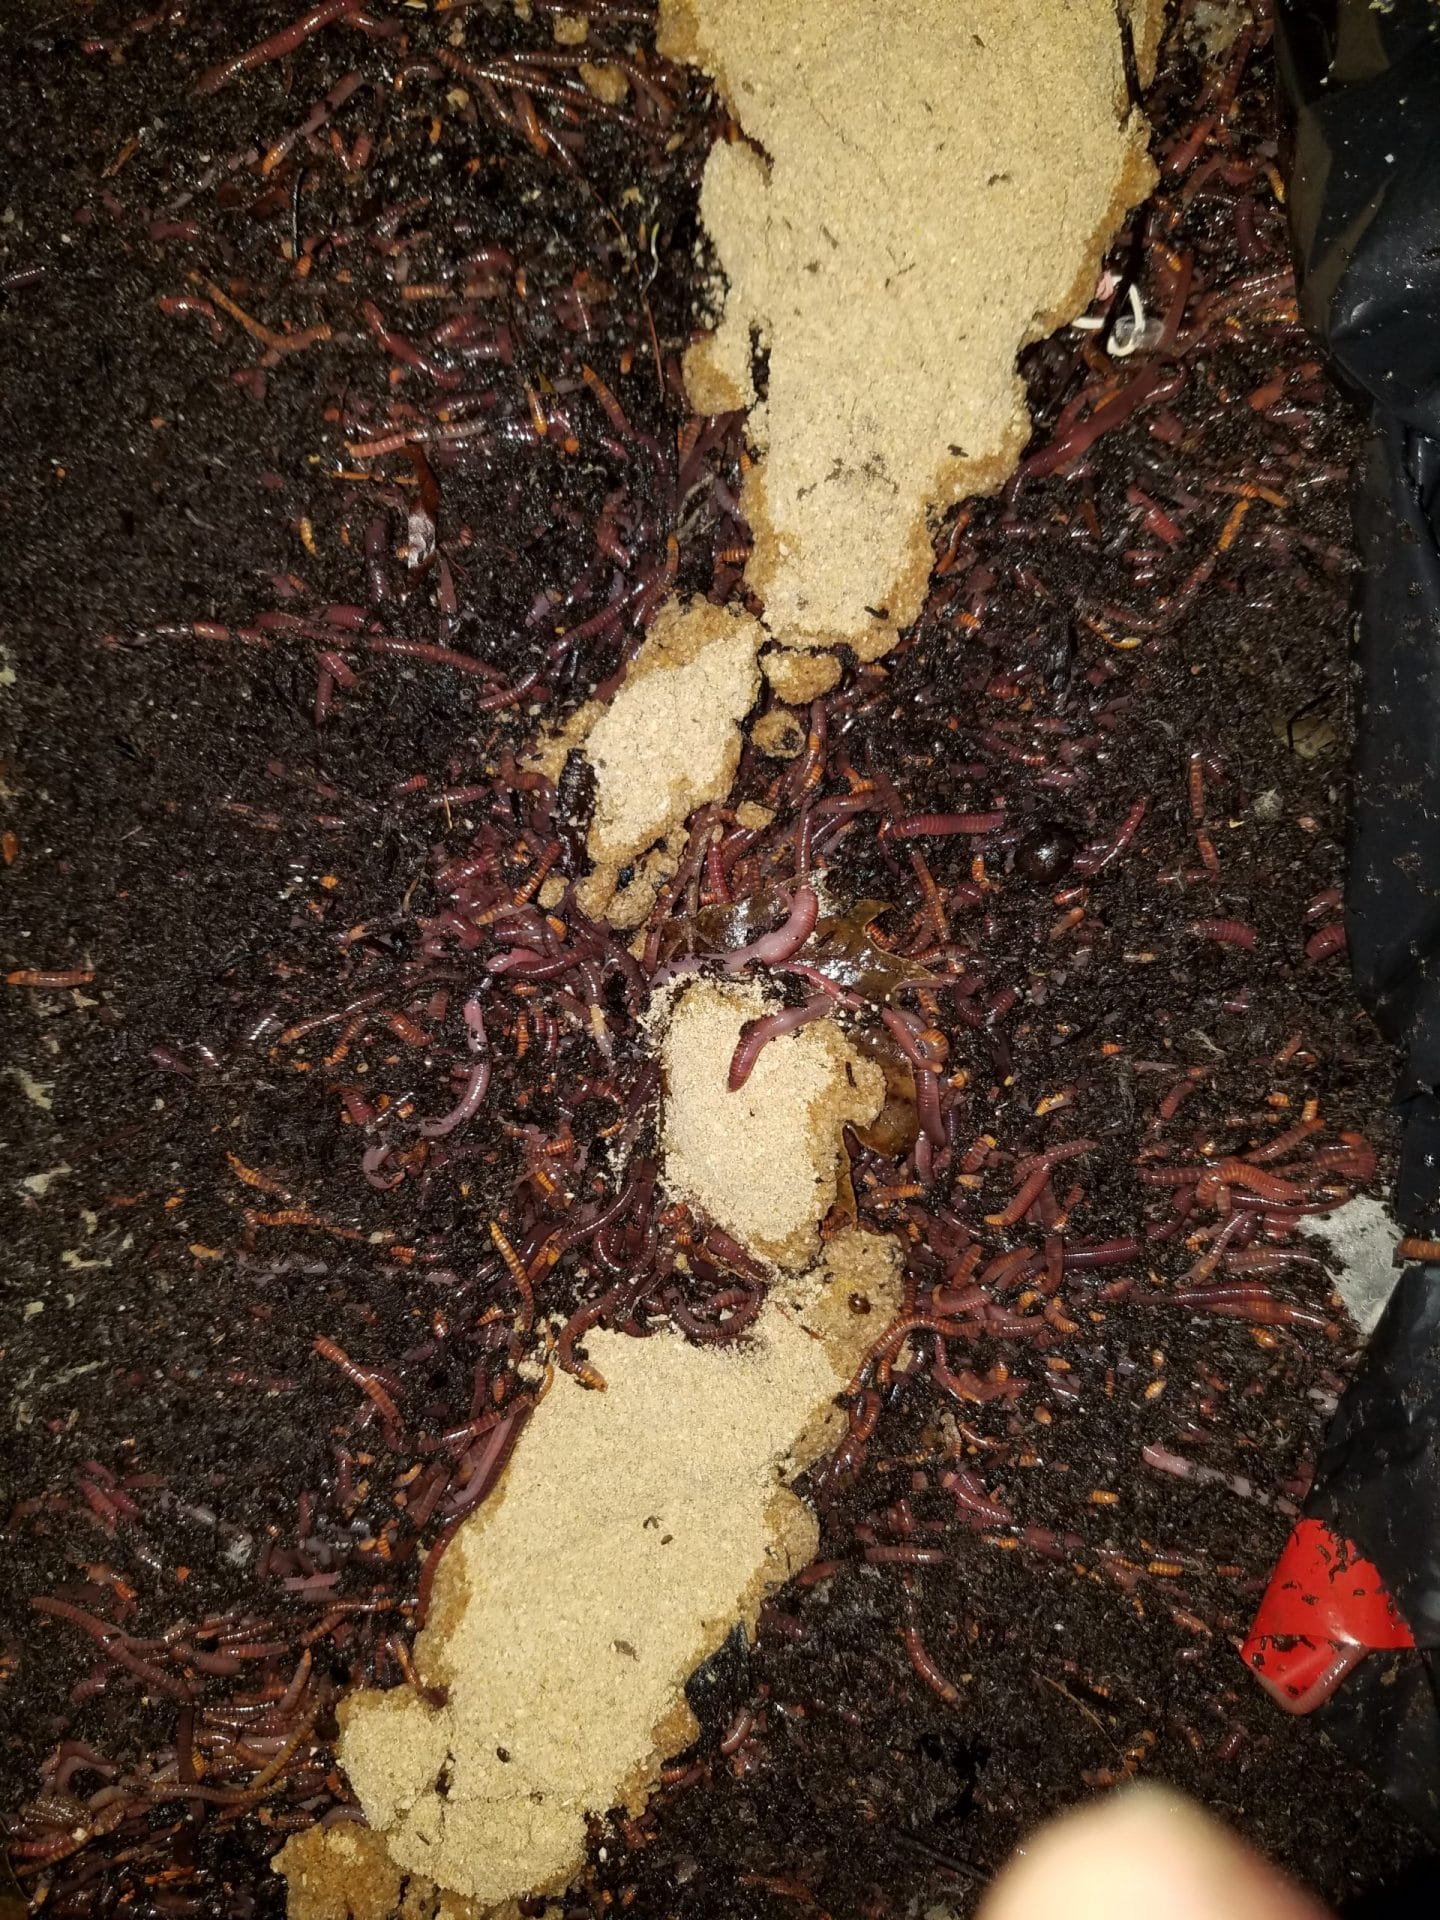 Red Worms eating